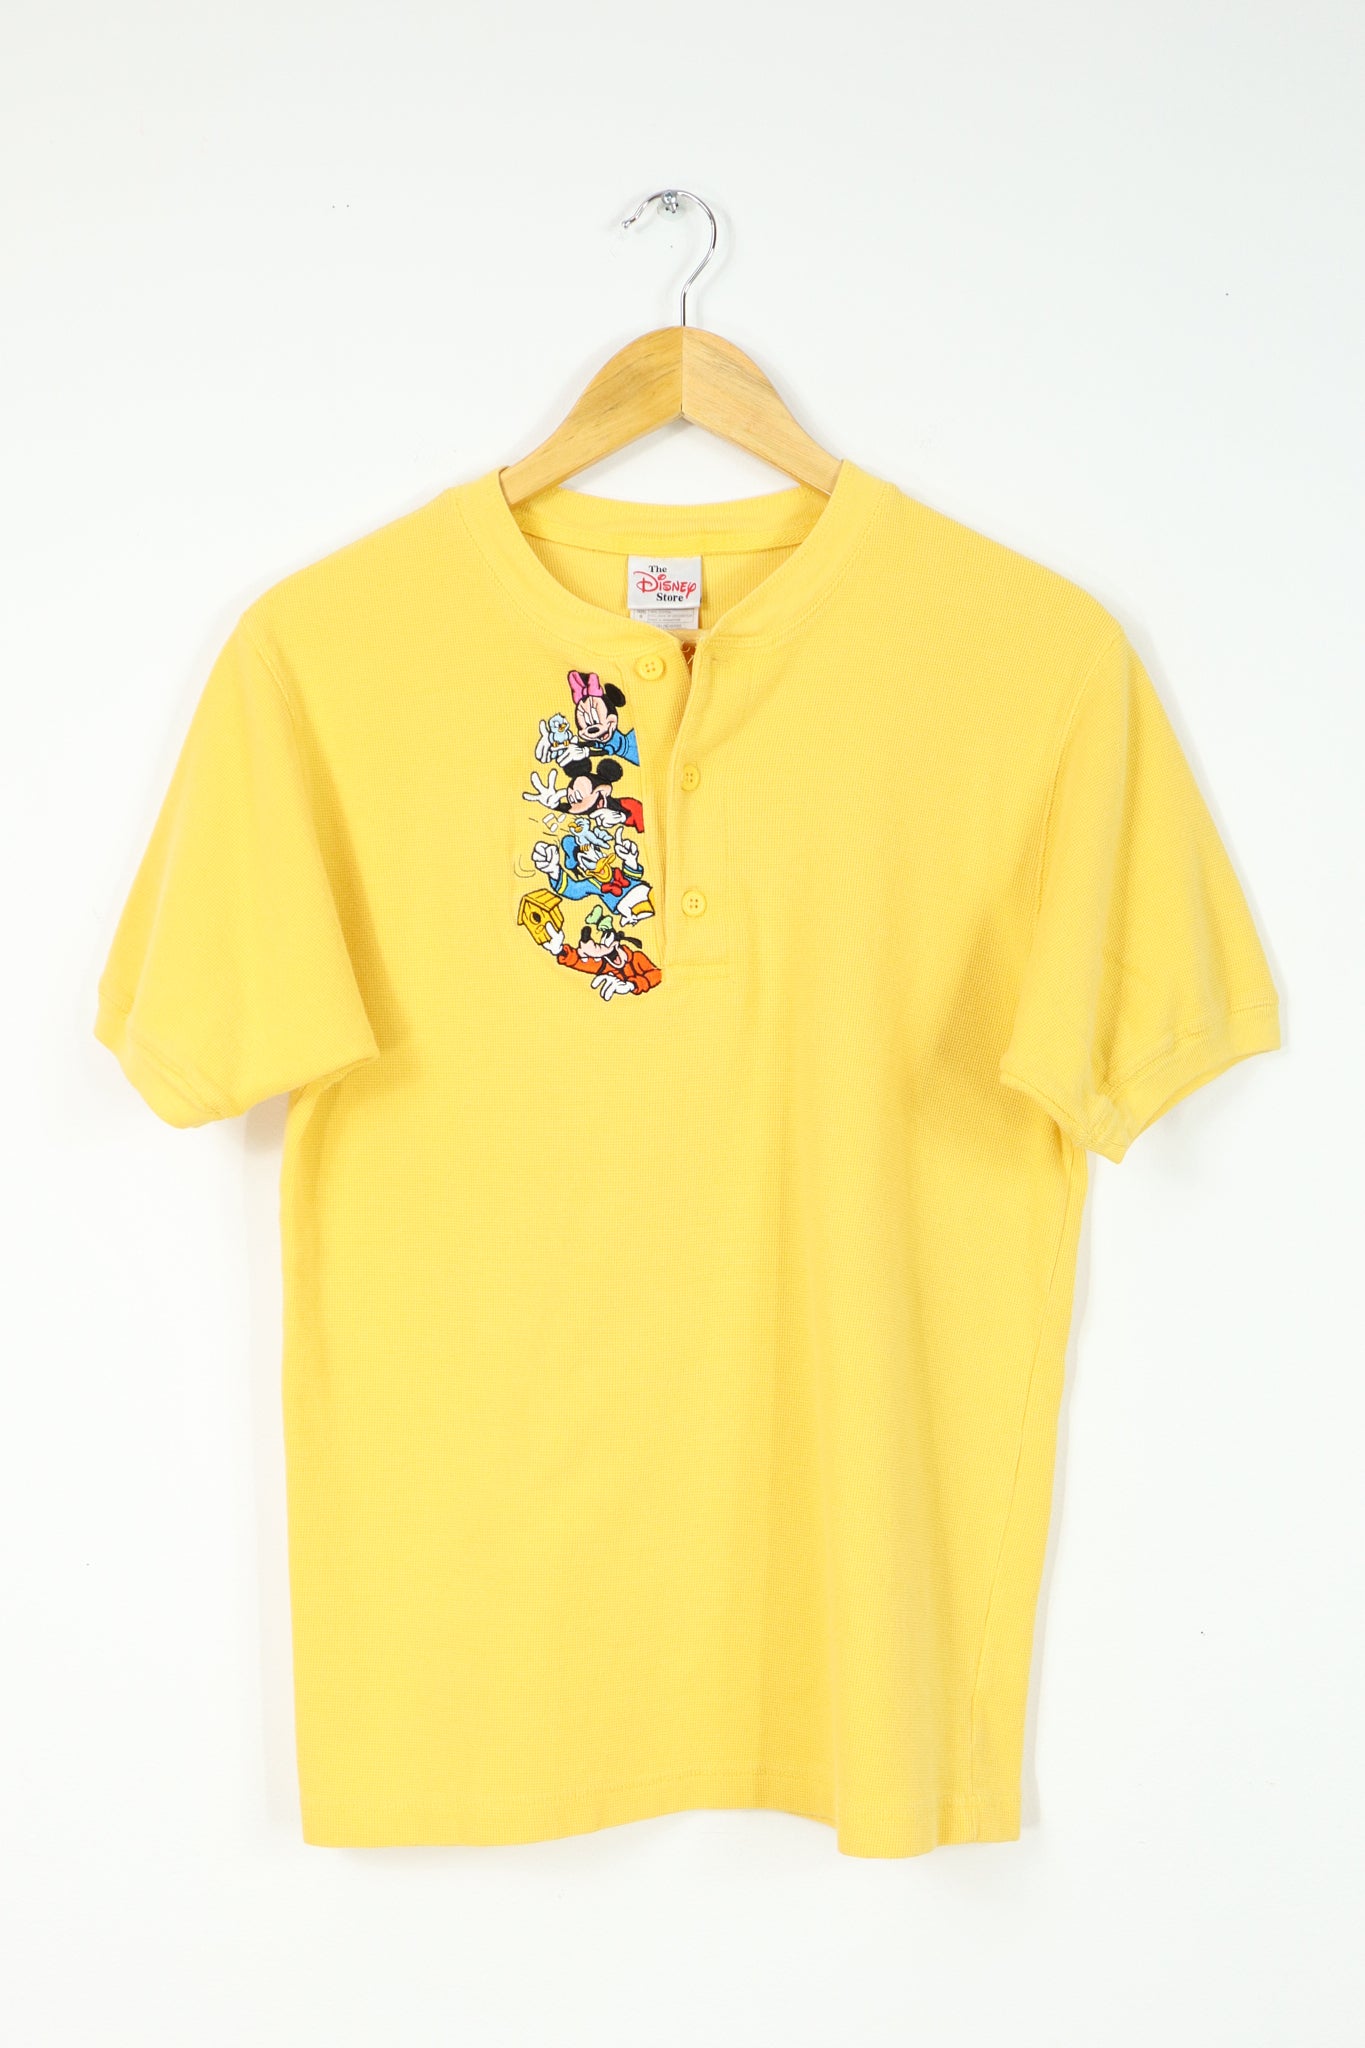 Vintage Embroidered Mickey & Friends Shirt